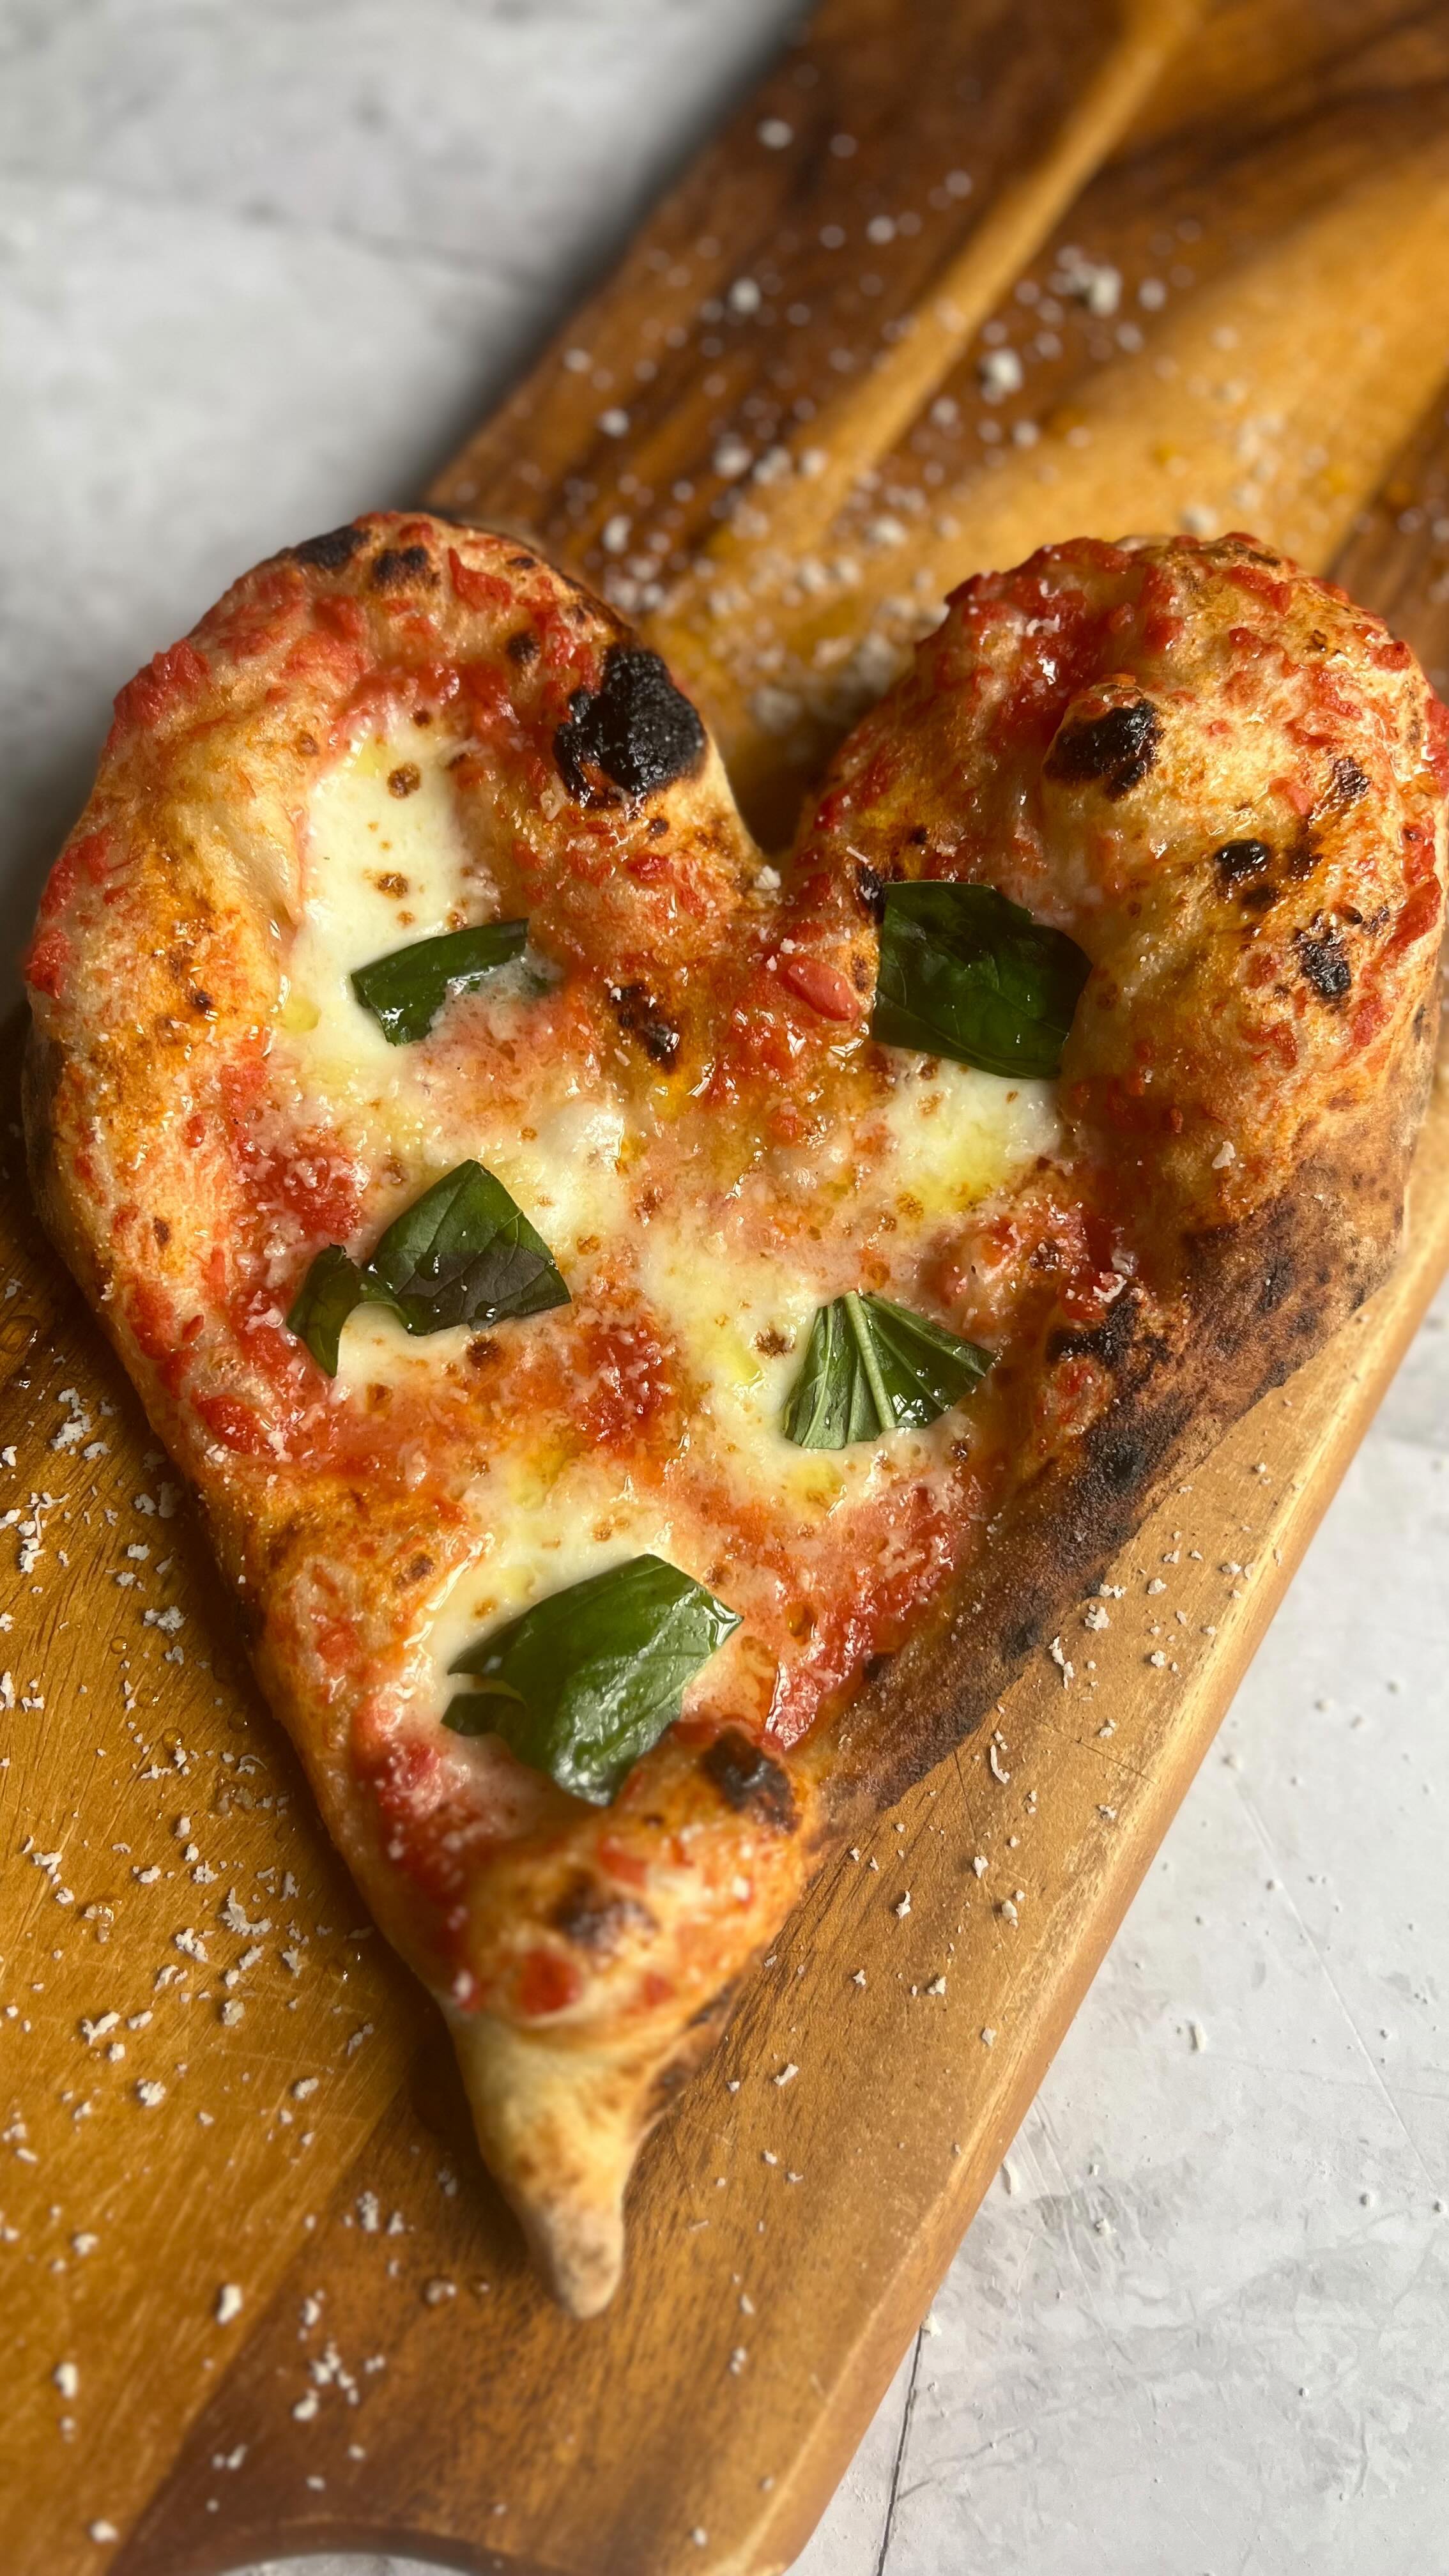 I ♥️ PIZZA. Comment RECIPE LINKS if you’d like links to my pizza dough recipes/tutorials sent direct to your inbox! #val